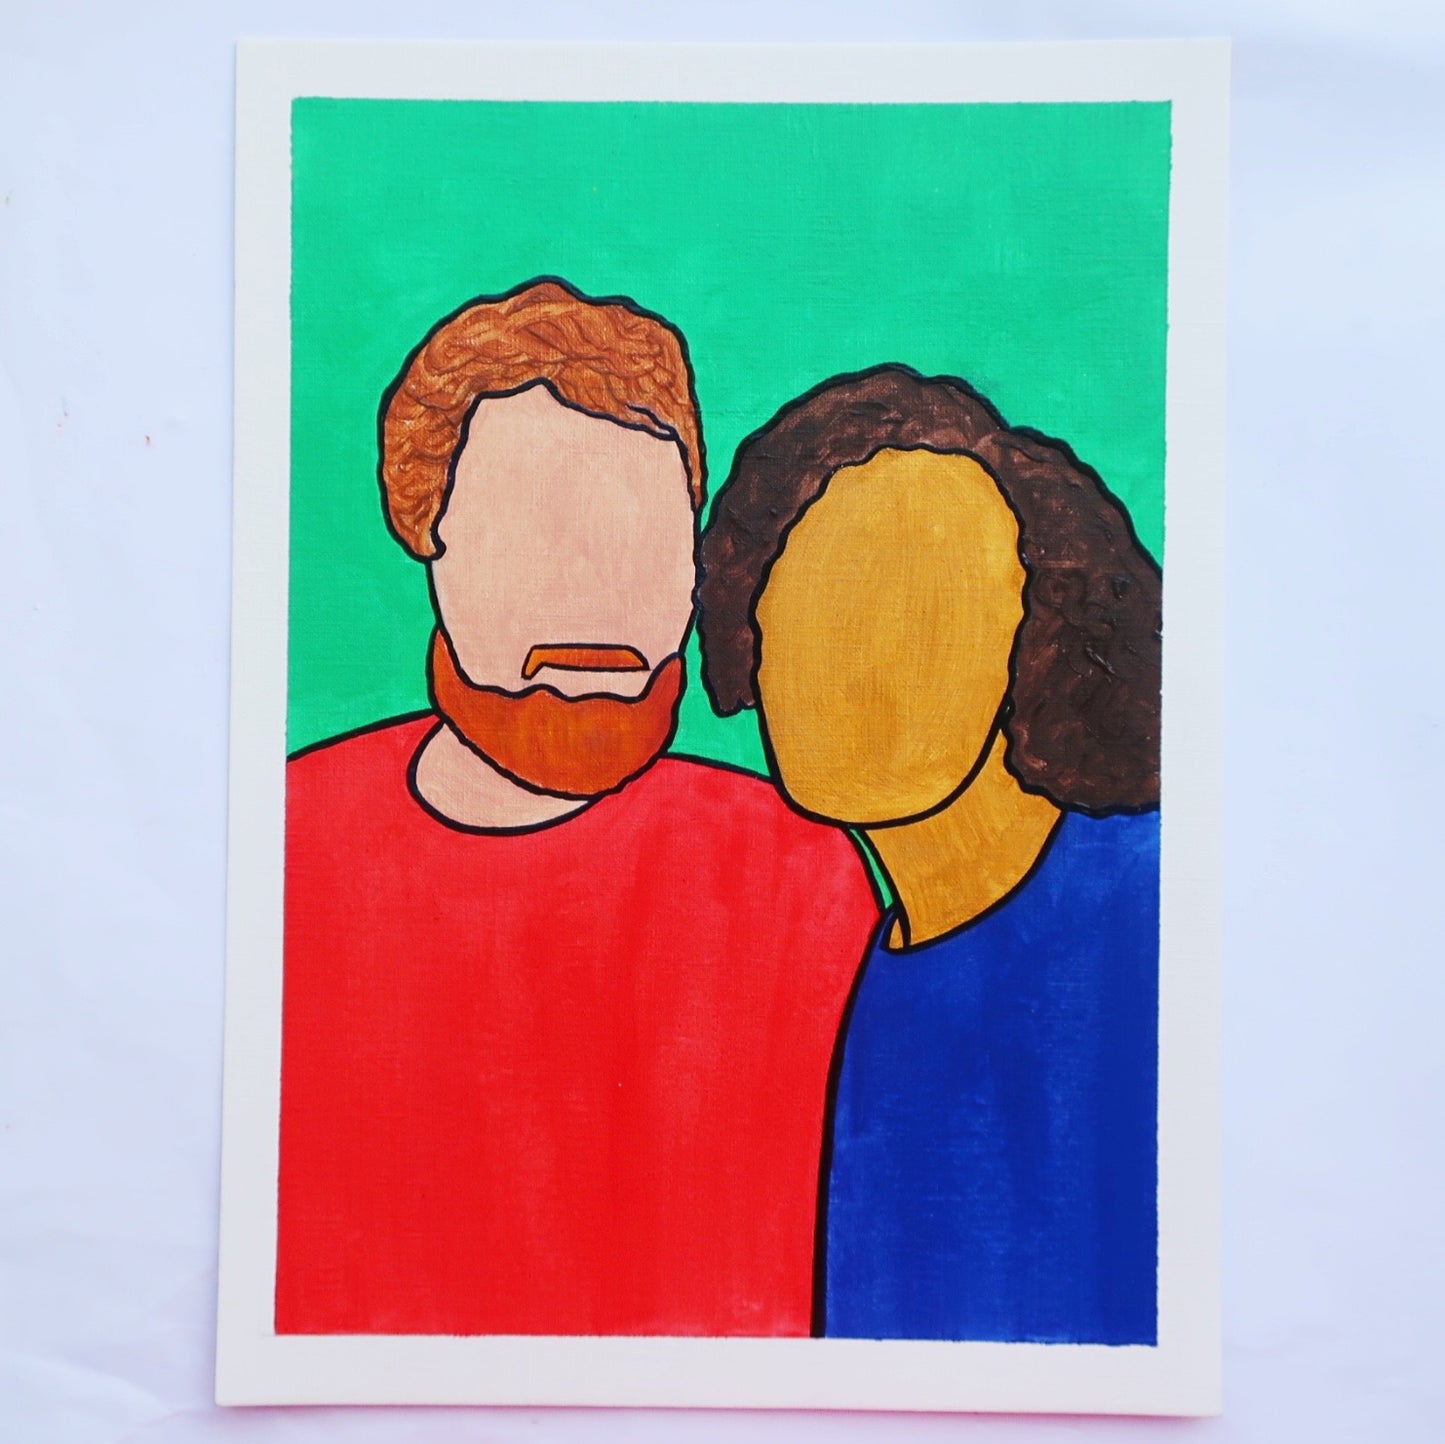 An oil painting of a red bearded man and a black woman on a green background